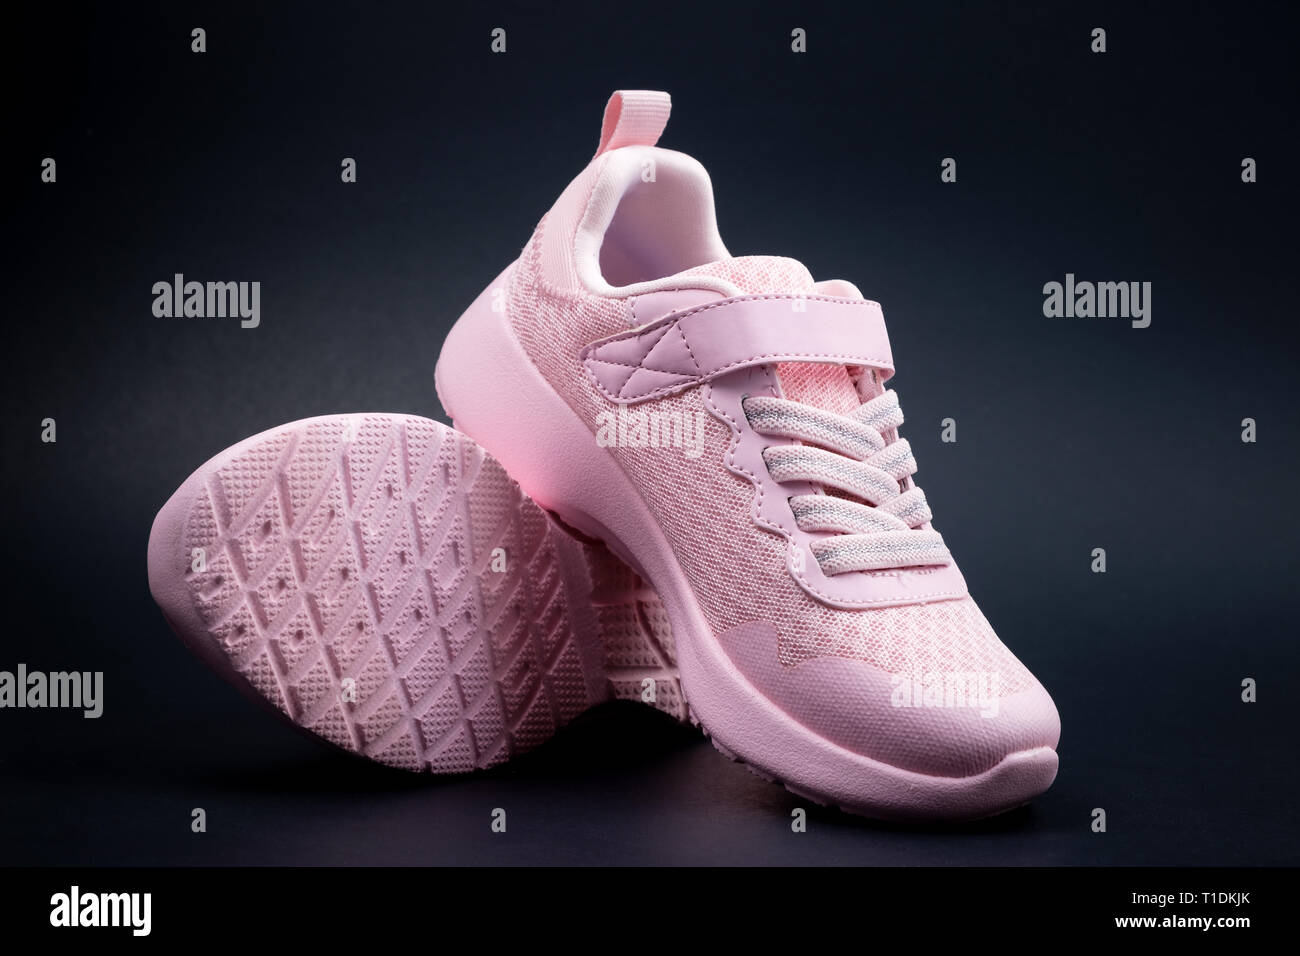 Unbranded pink running shoes on a black background Stock Photo